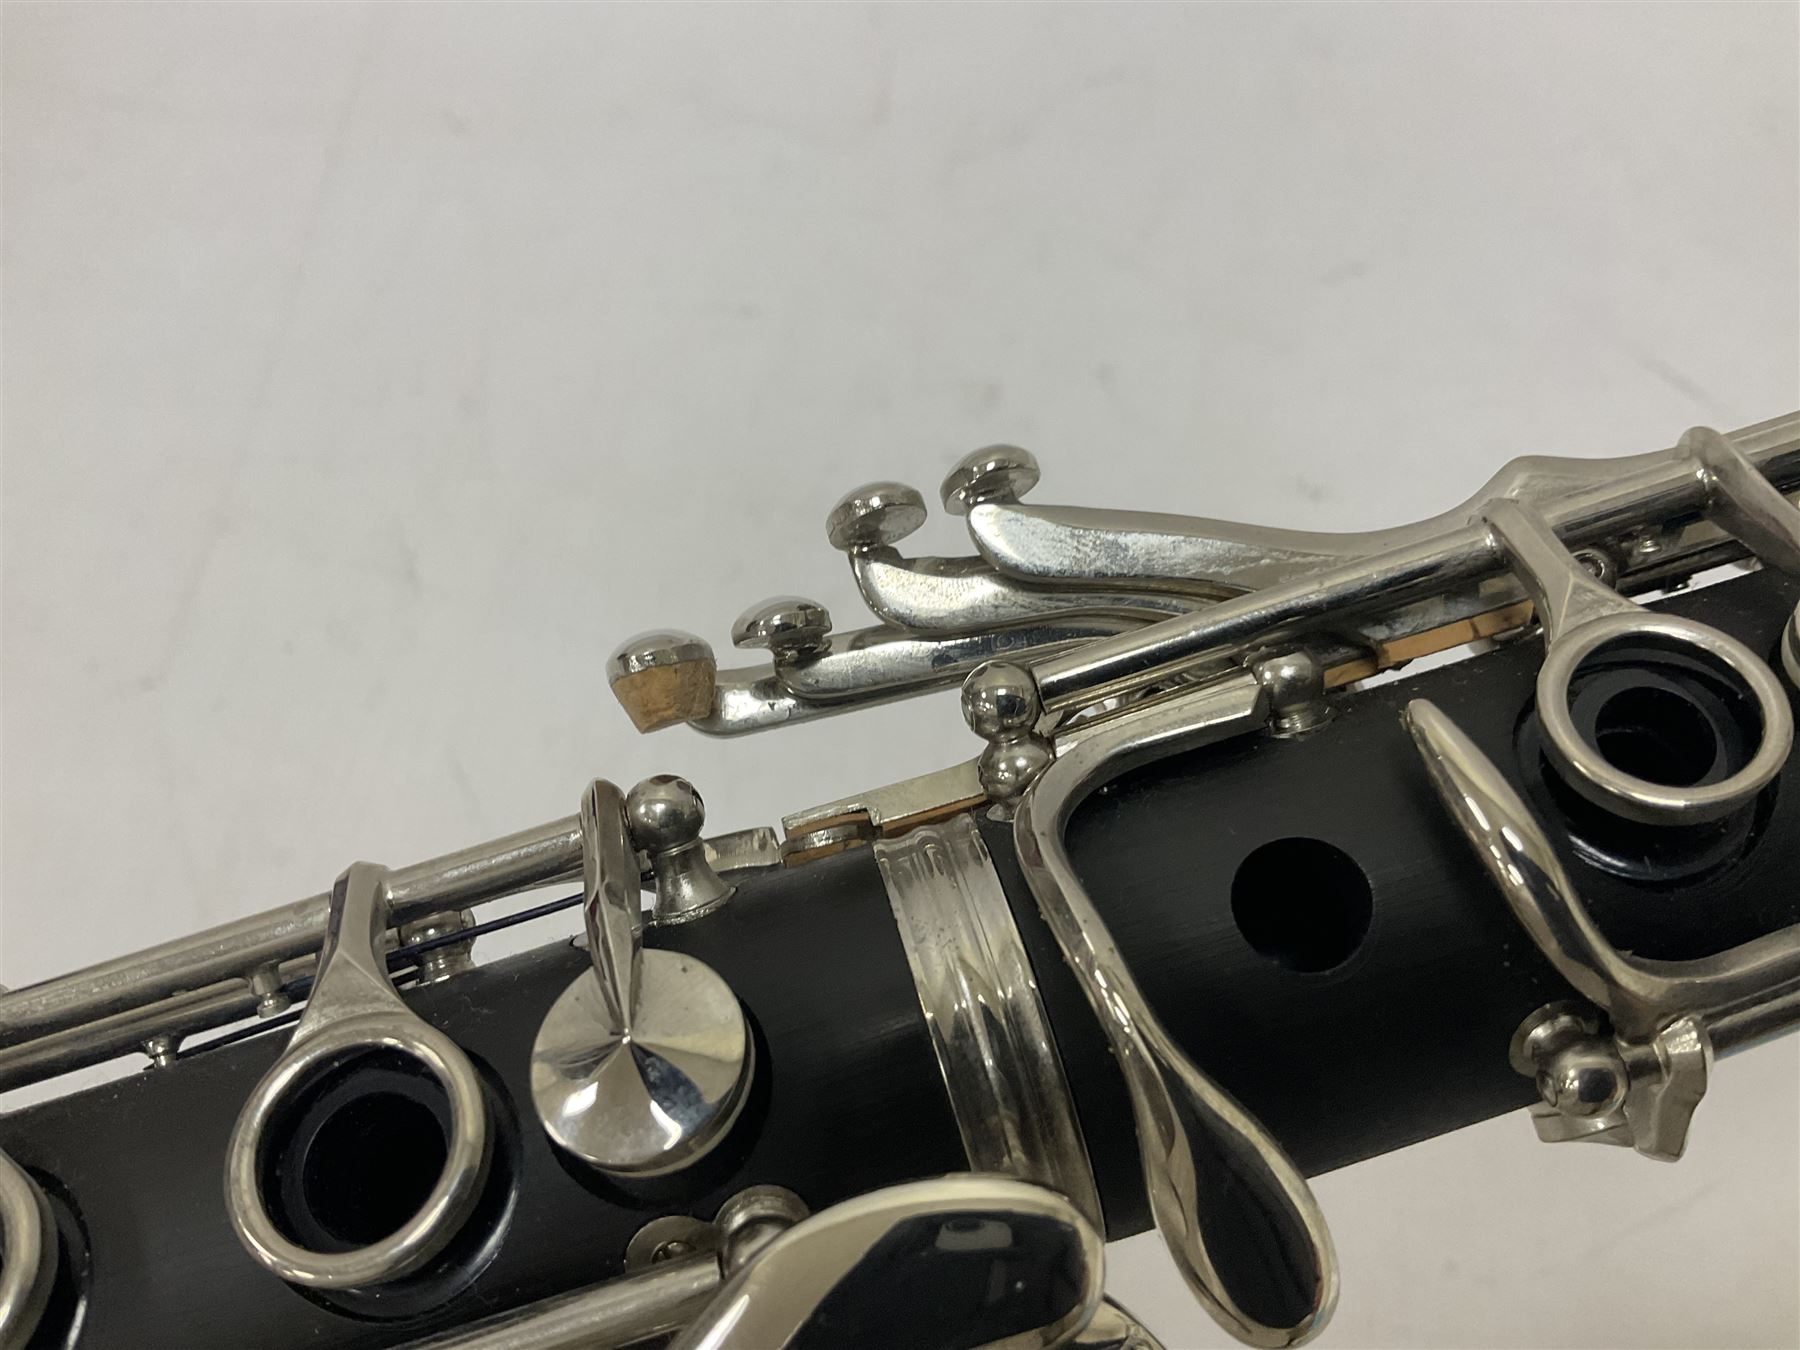 Hanson B Flat clarinet in a fitted case with accessories and three boxes of Vandoren reeds - Image 15 of 21